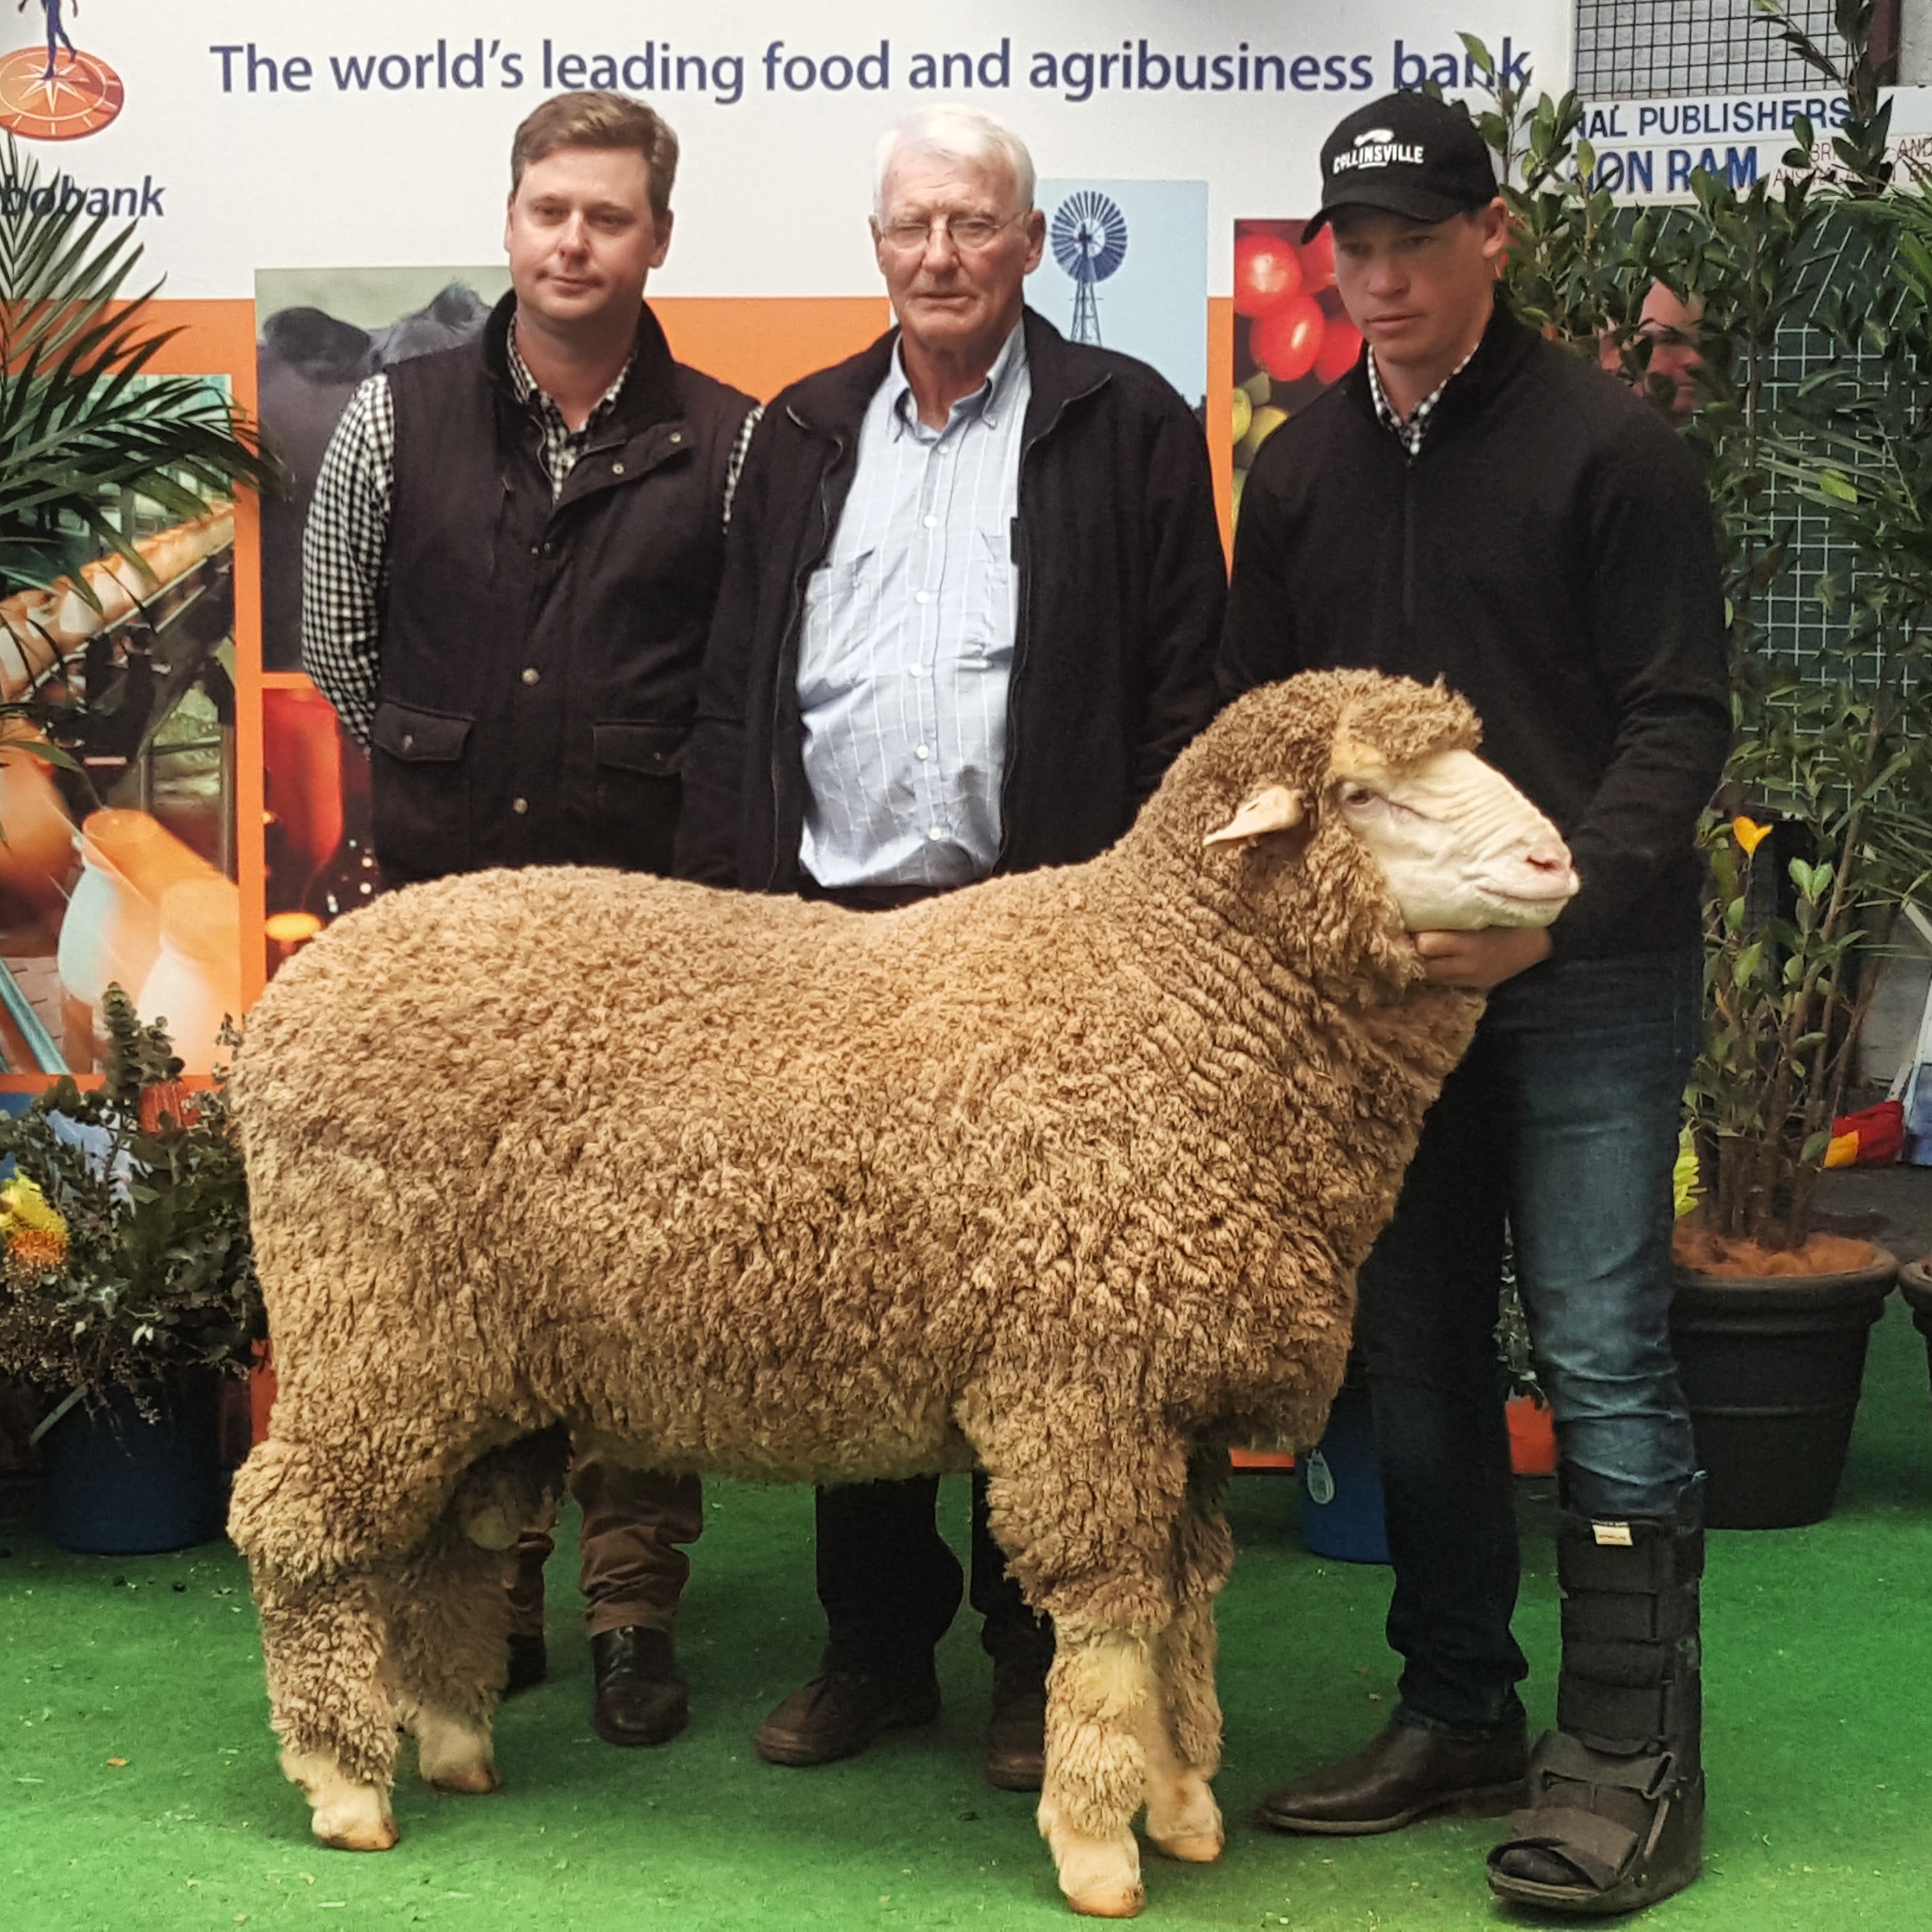 COLLINSVILLE LOT 7 TOPPED THE 2018 ADELAIDE MERINO RAM SALE